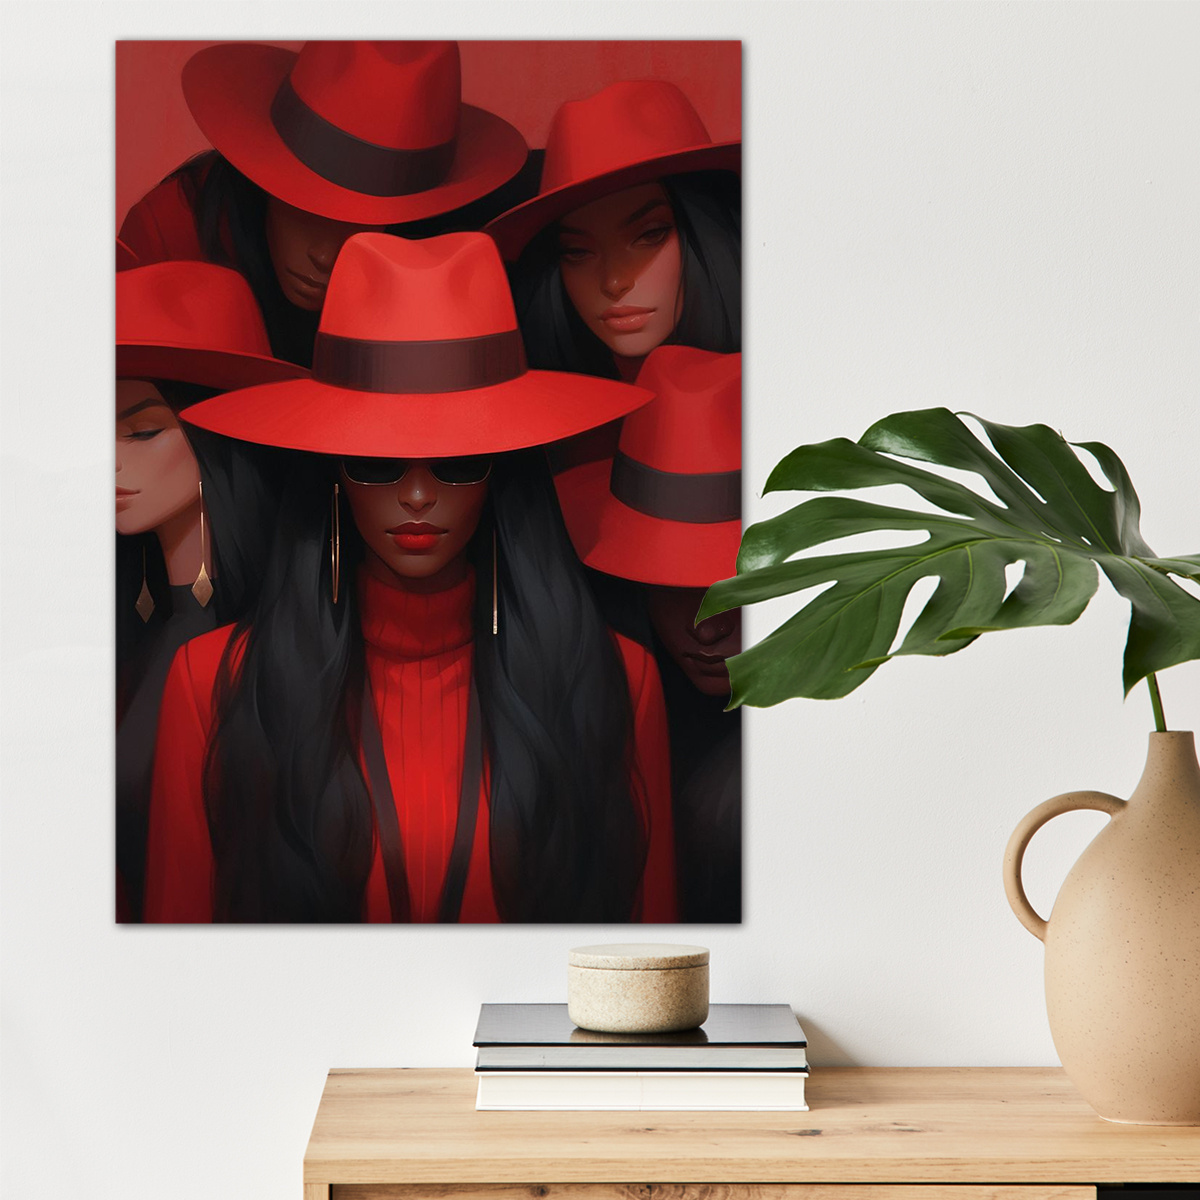 

1pc Red Hat Girls Canvas Wall Art For Home Decor, High Quality Wall Decor, Canvas Prints For Living Room Bedroom Bathroom Kitchen Office Cafe Decor, Perfect Gift And Decoration